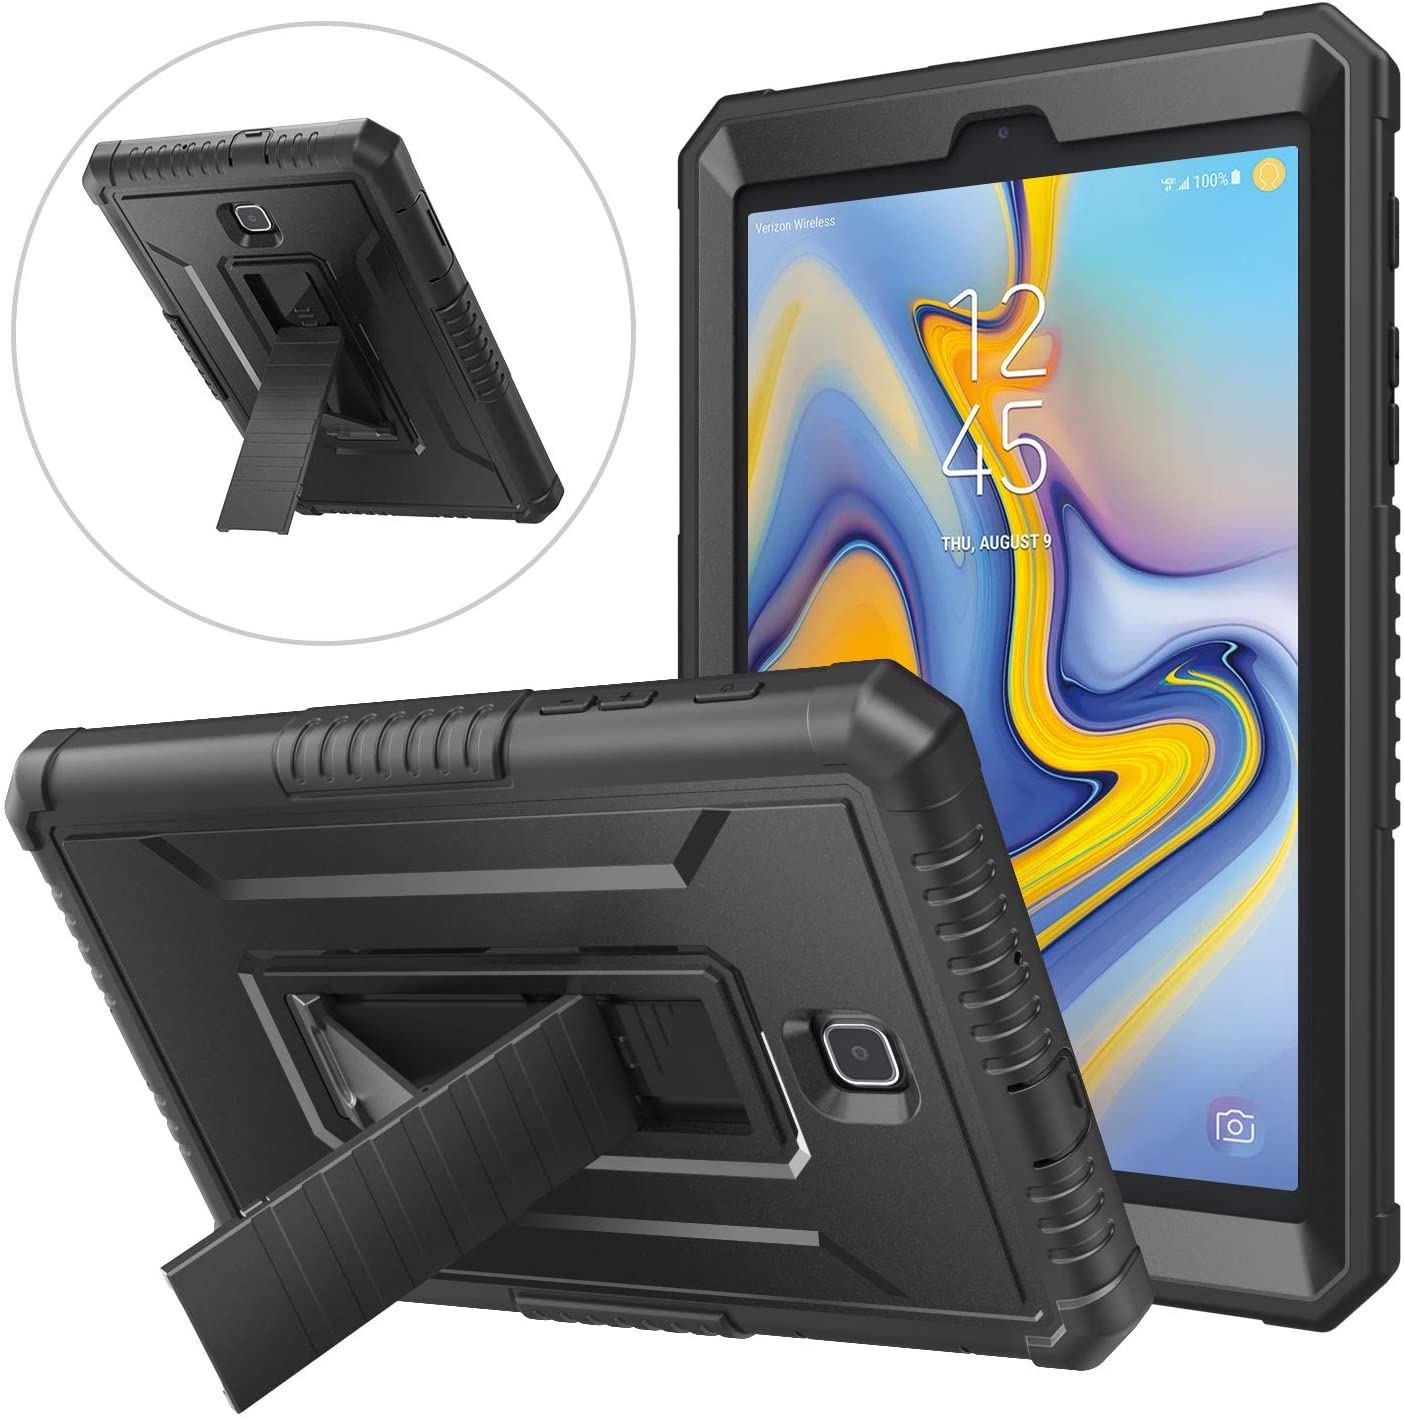 MoKo Case Fit Samsung Galaxy Tab A 8.0 LTE 2018 SM-T387W/Tab A 8.0 2018 SM-T387, Shockproof Heavy Duty Full Body Vertical/Horizontal Cover Stand with Screen Protector for Galaxy Tab A 8.0 201